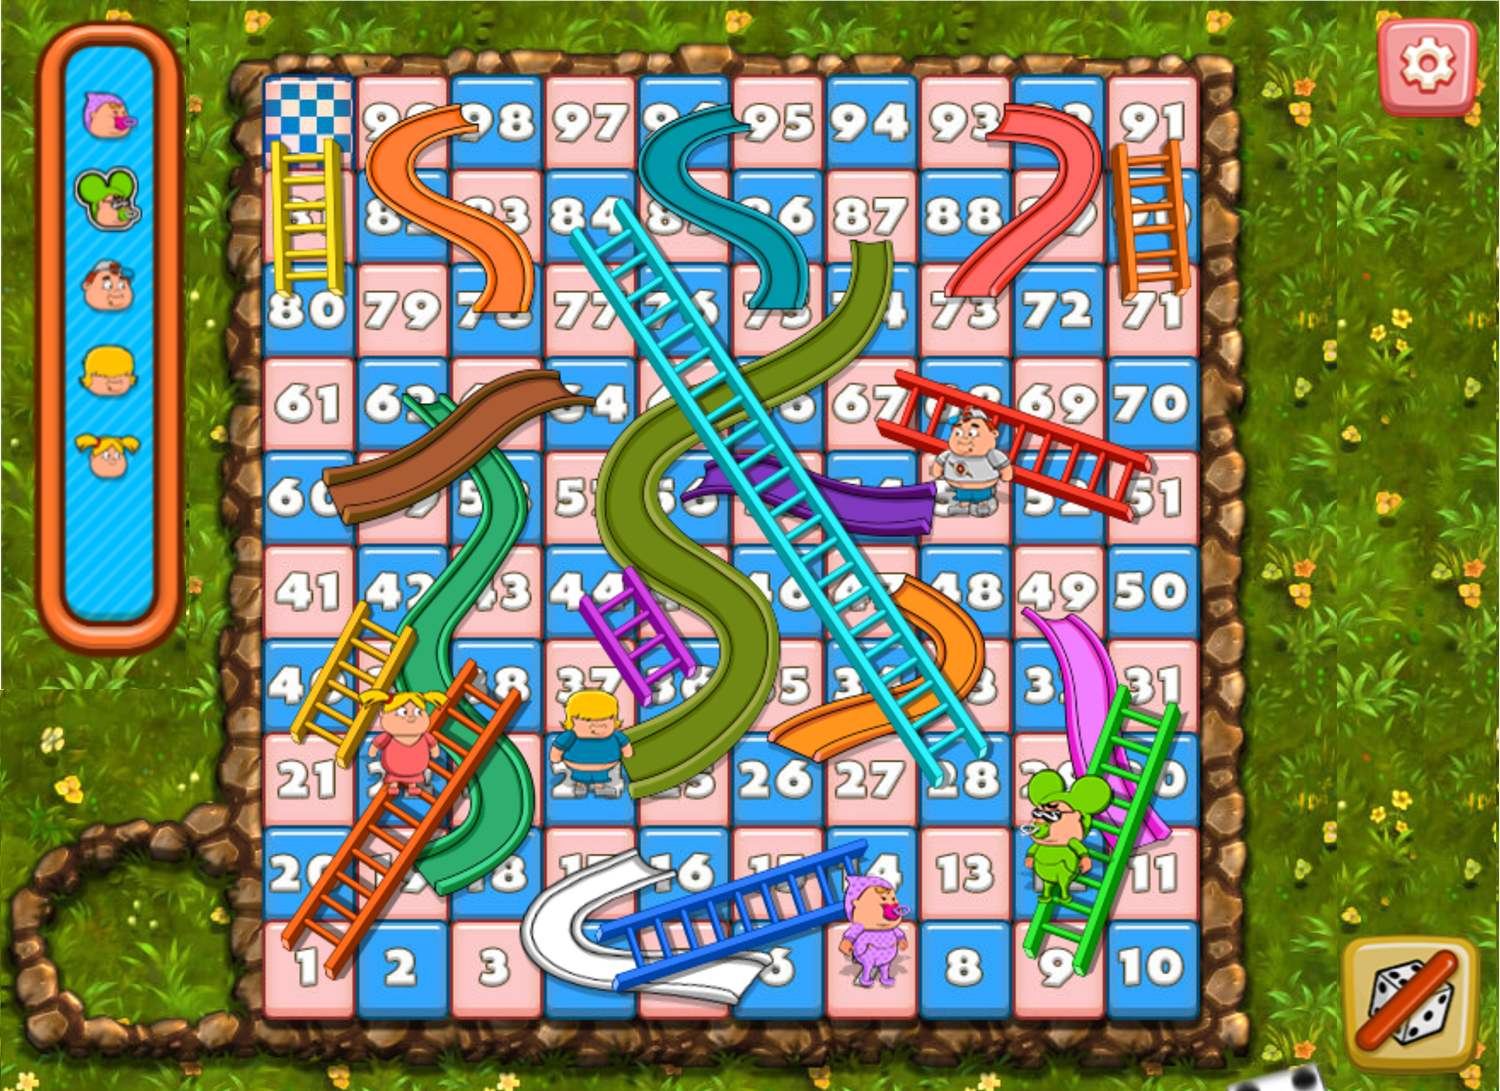 Chutes and Ladders Board Game.